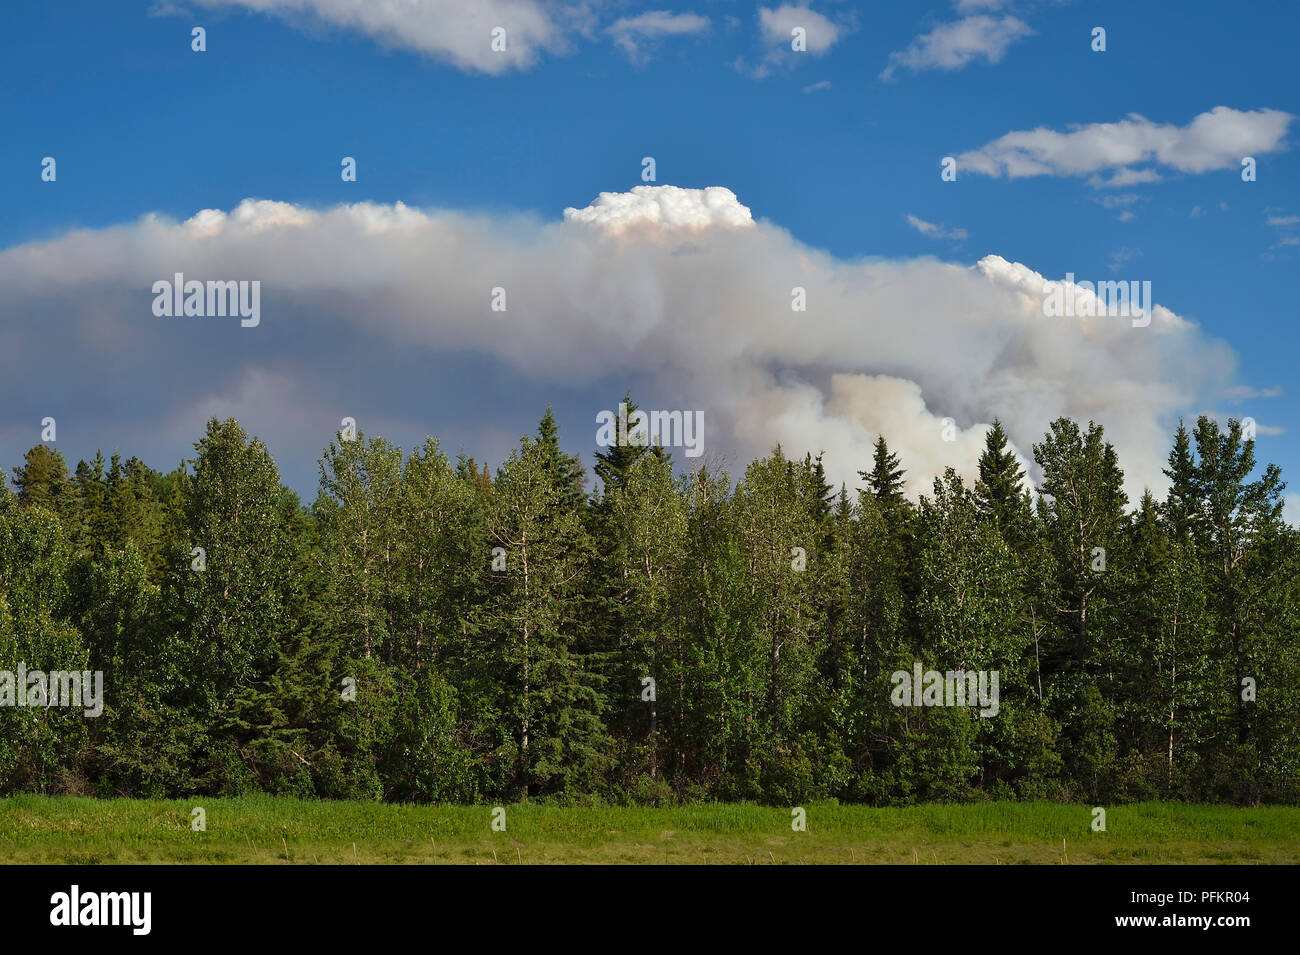 A horizontal landscape image of smoke traveling upward into a blue summer sky in rural Alberta Canada Stock Photo